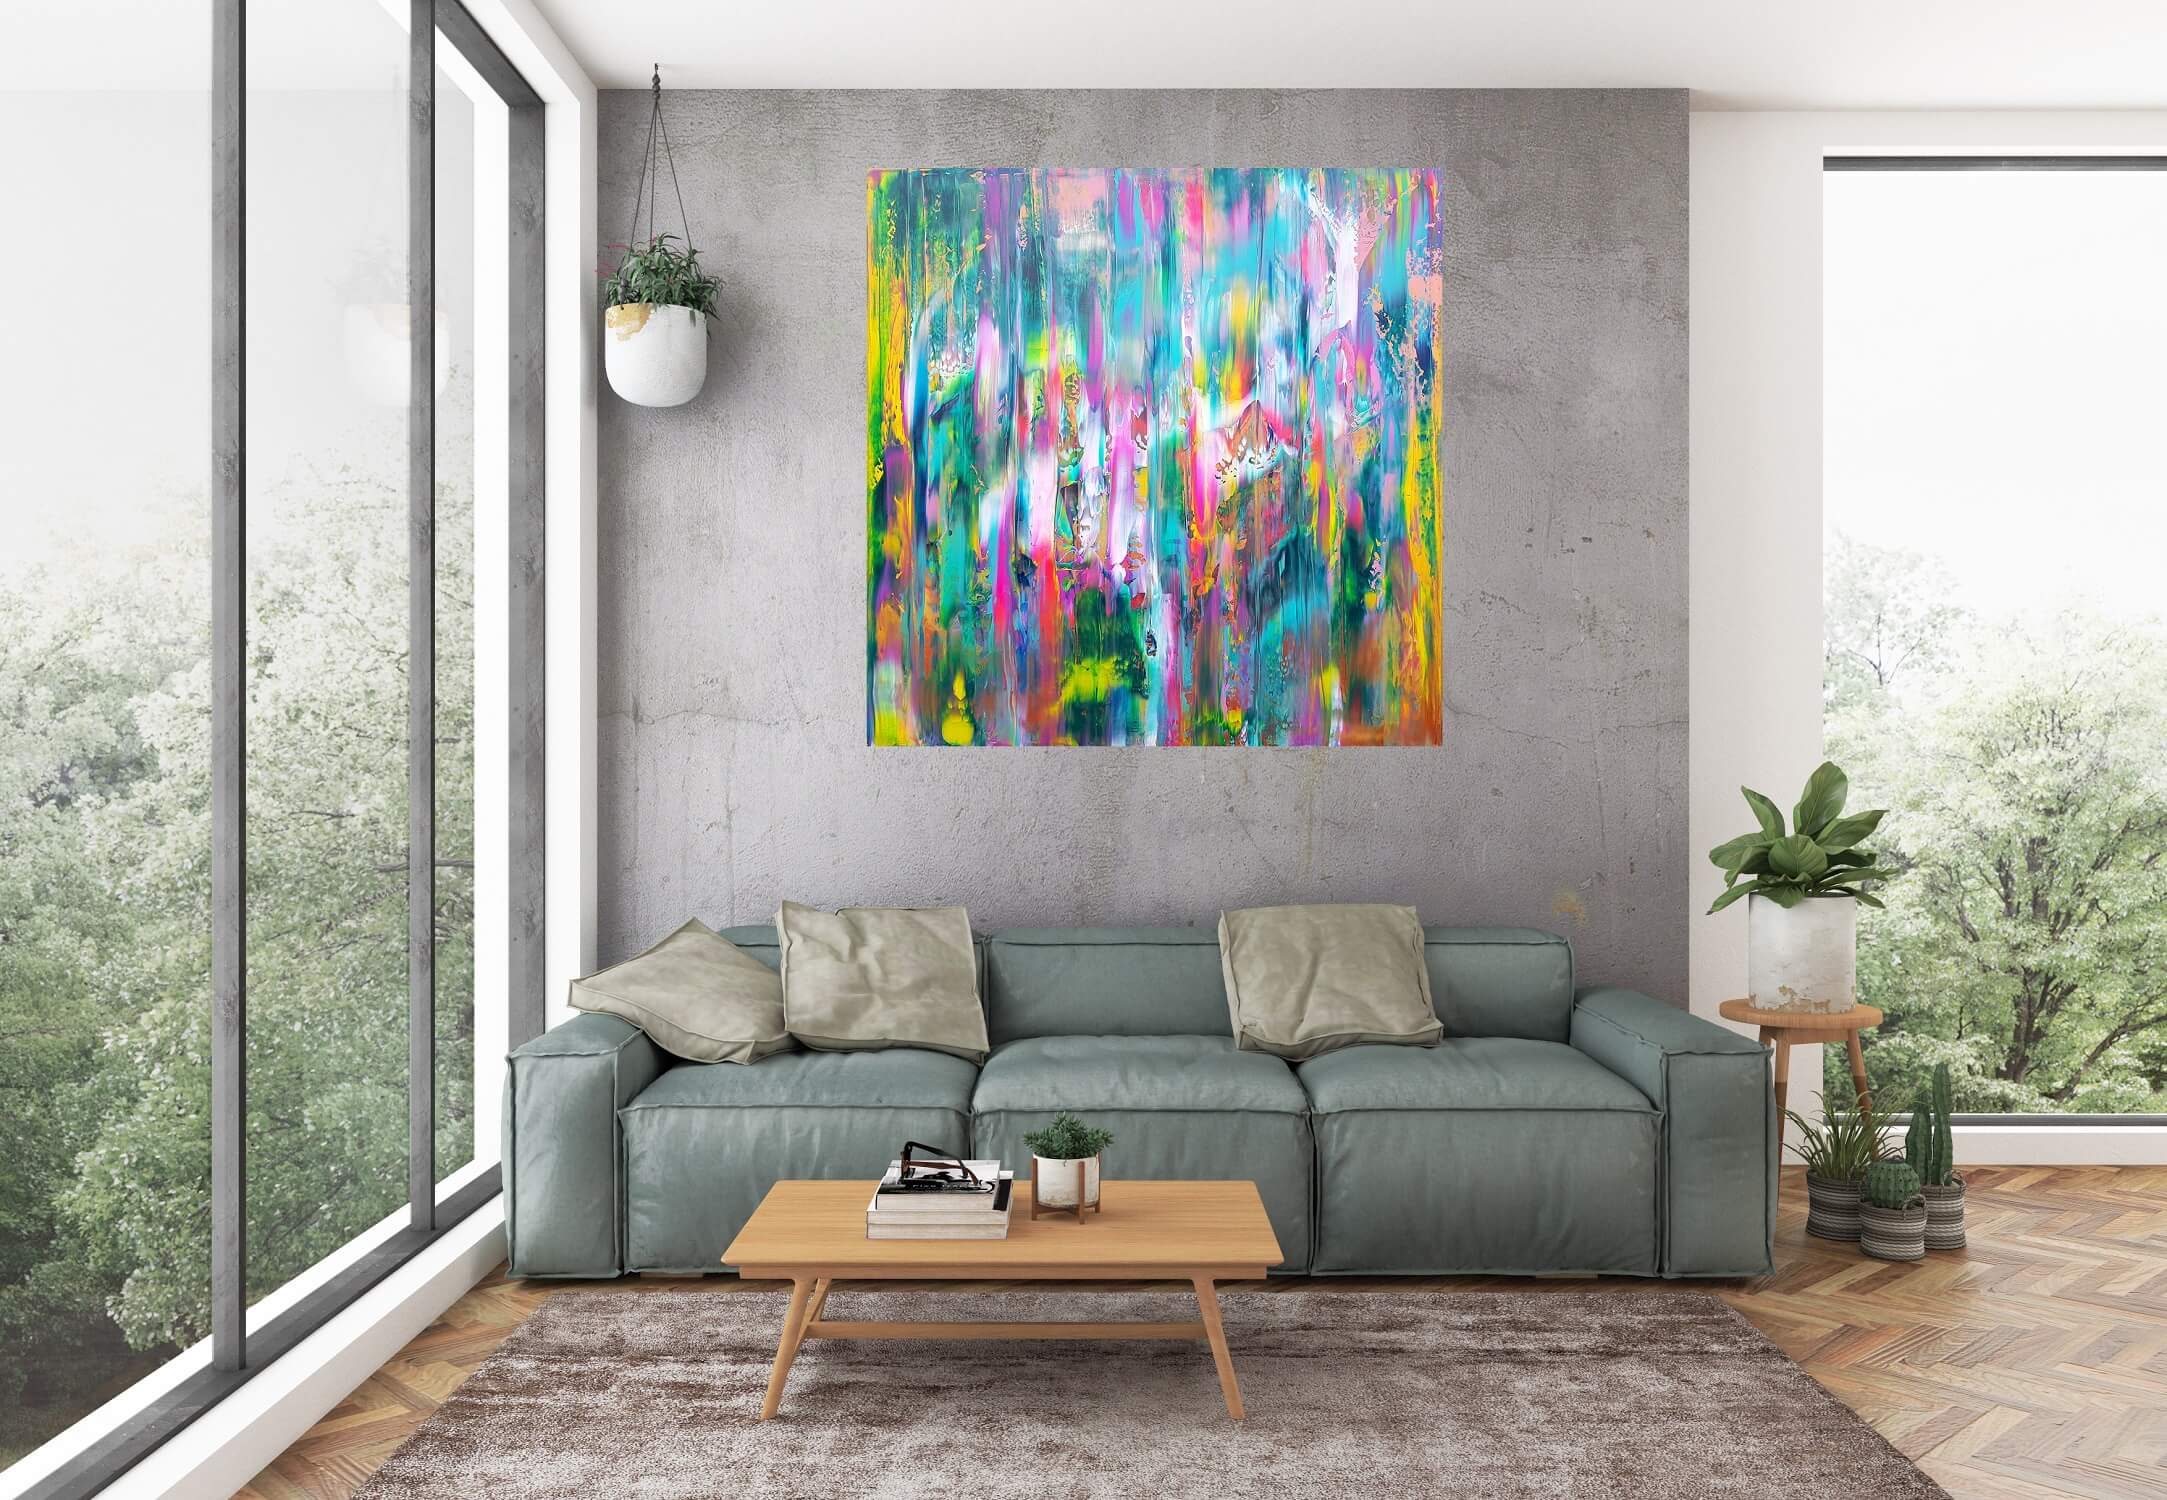 Freezing kiss - large colorful abstract - Ivana Olbricht